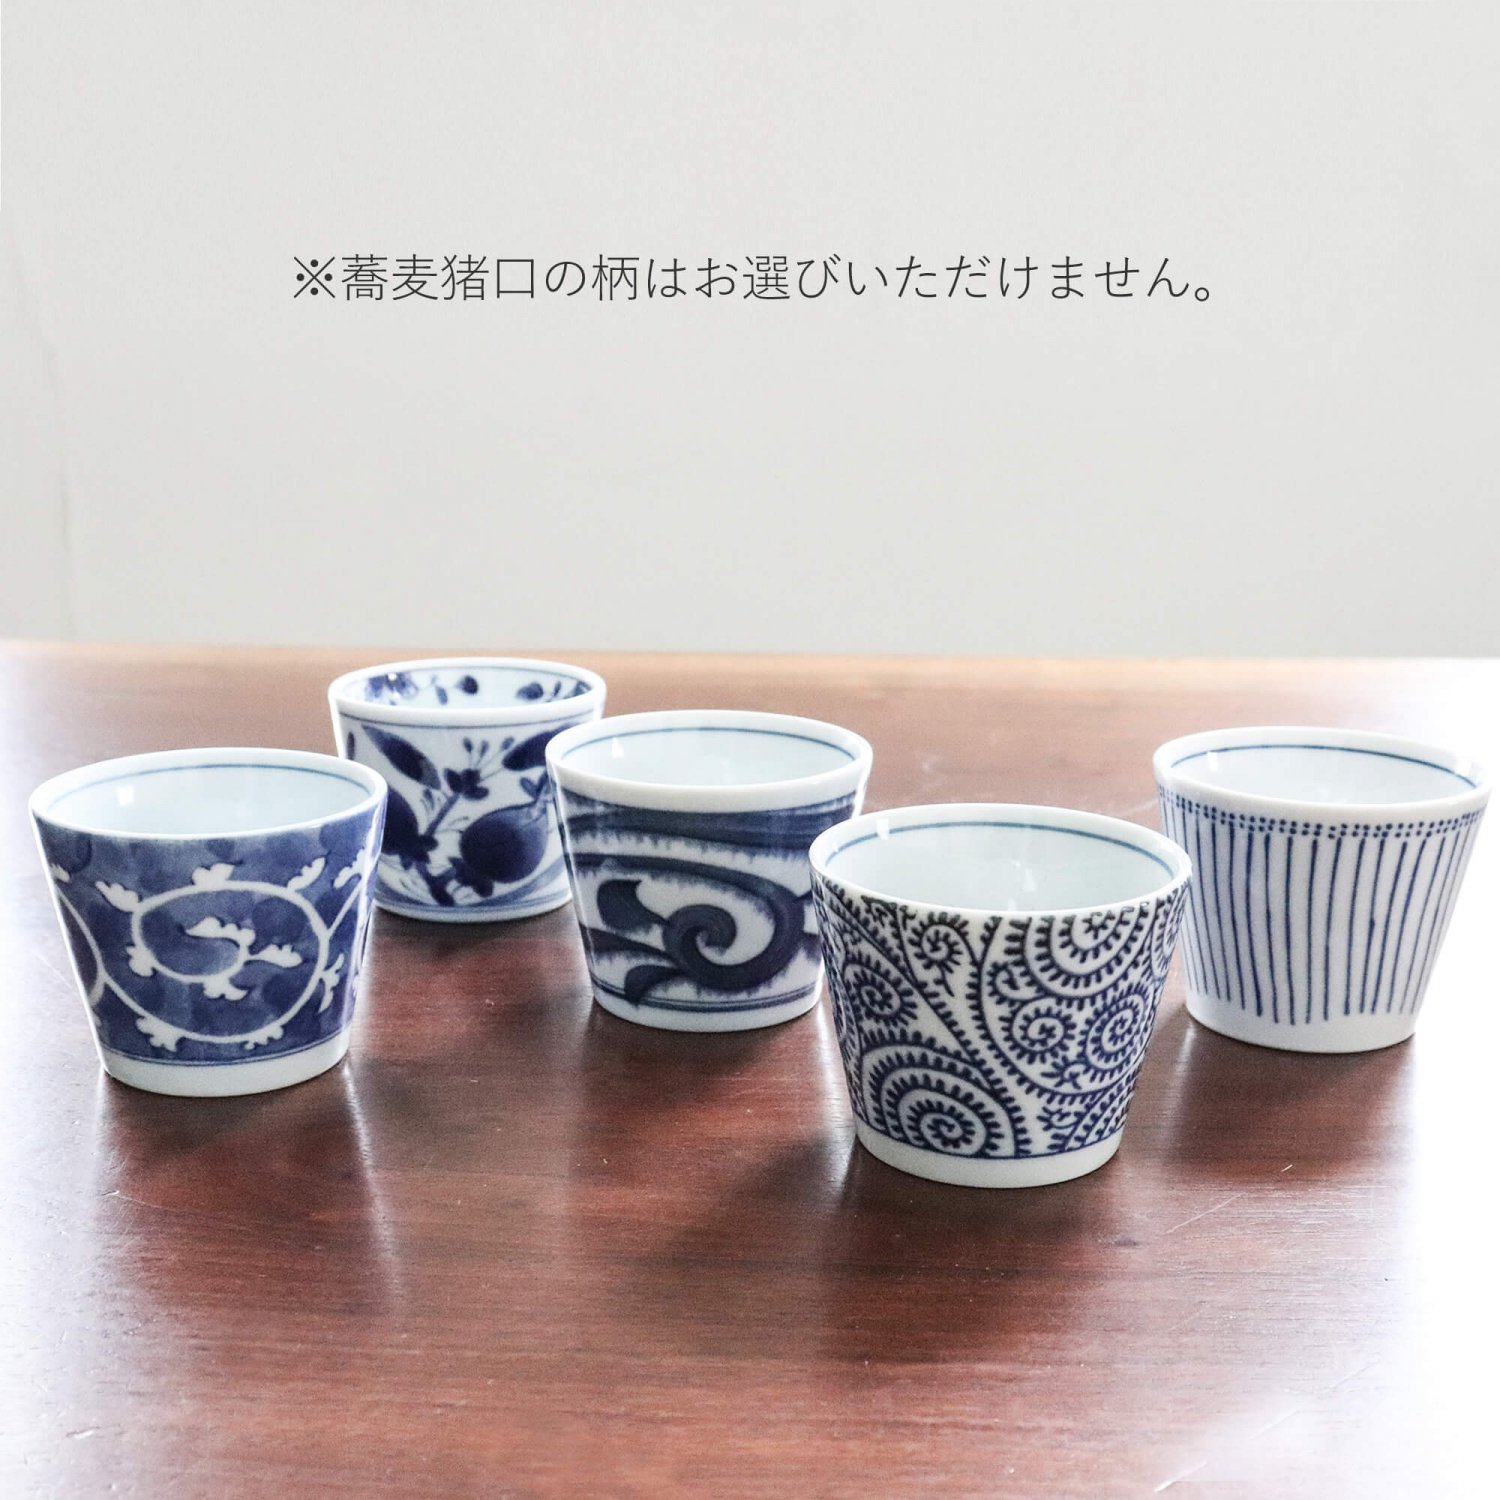 【40％OFF】盆栽 松吹き流し×食器 ギフトセット CUPBON 盆栽 フェイクグリーン<img class='new_mark_img2' src='https://img.shop-pro.jp/img/new/icons2.gif' style='border:none;display:inline;margin:0px;padding:0px;width:auto;' />